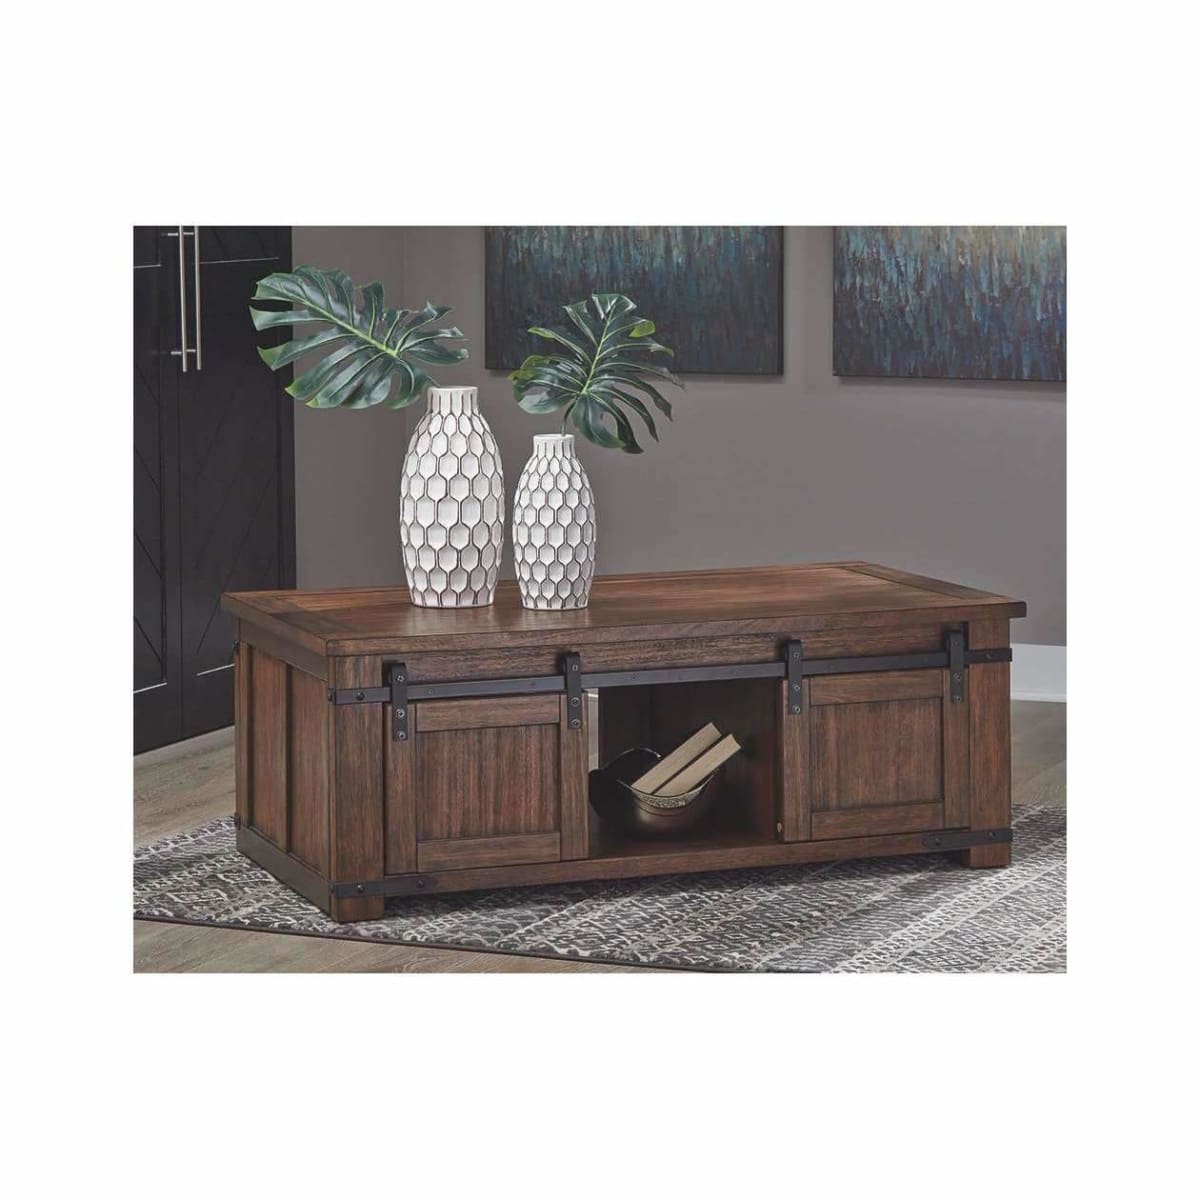 Budmore Coffee Table - COFFEE TABLE